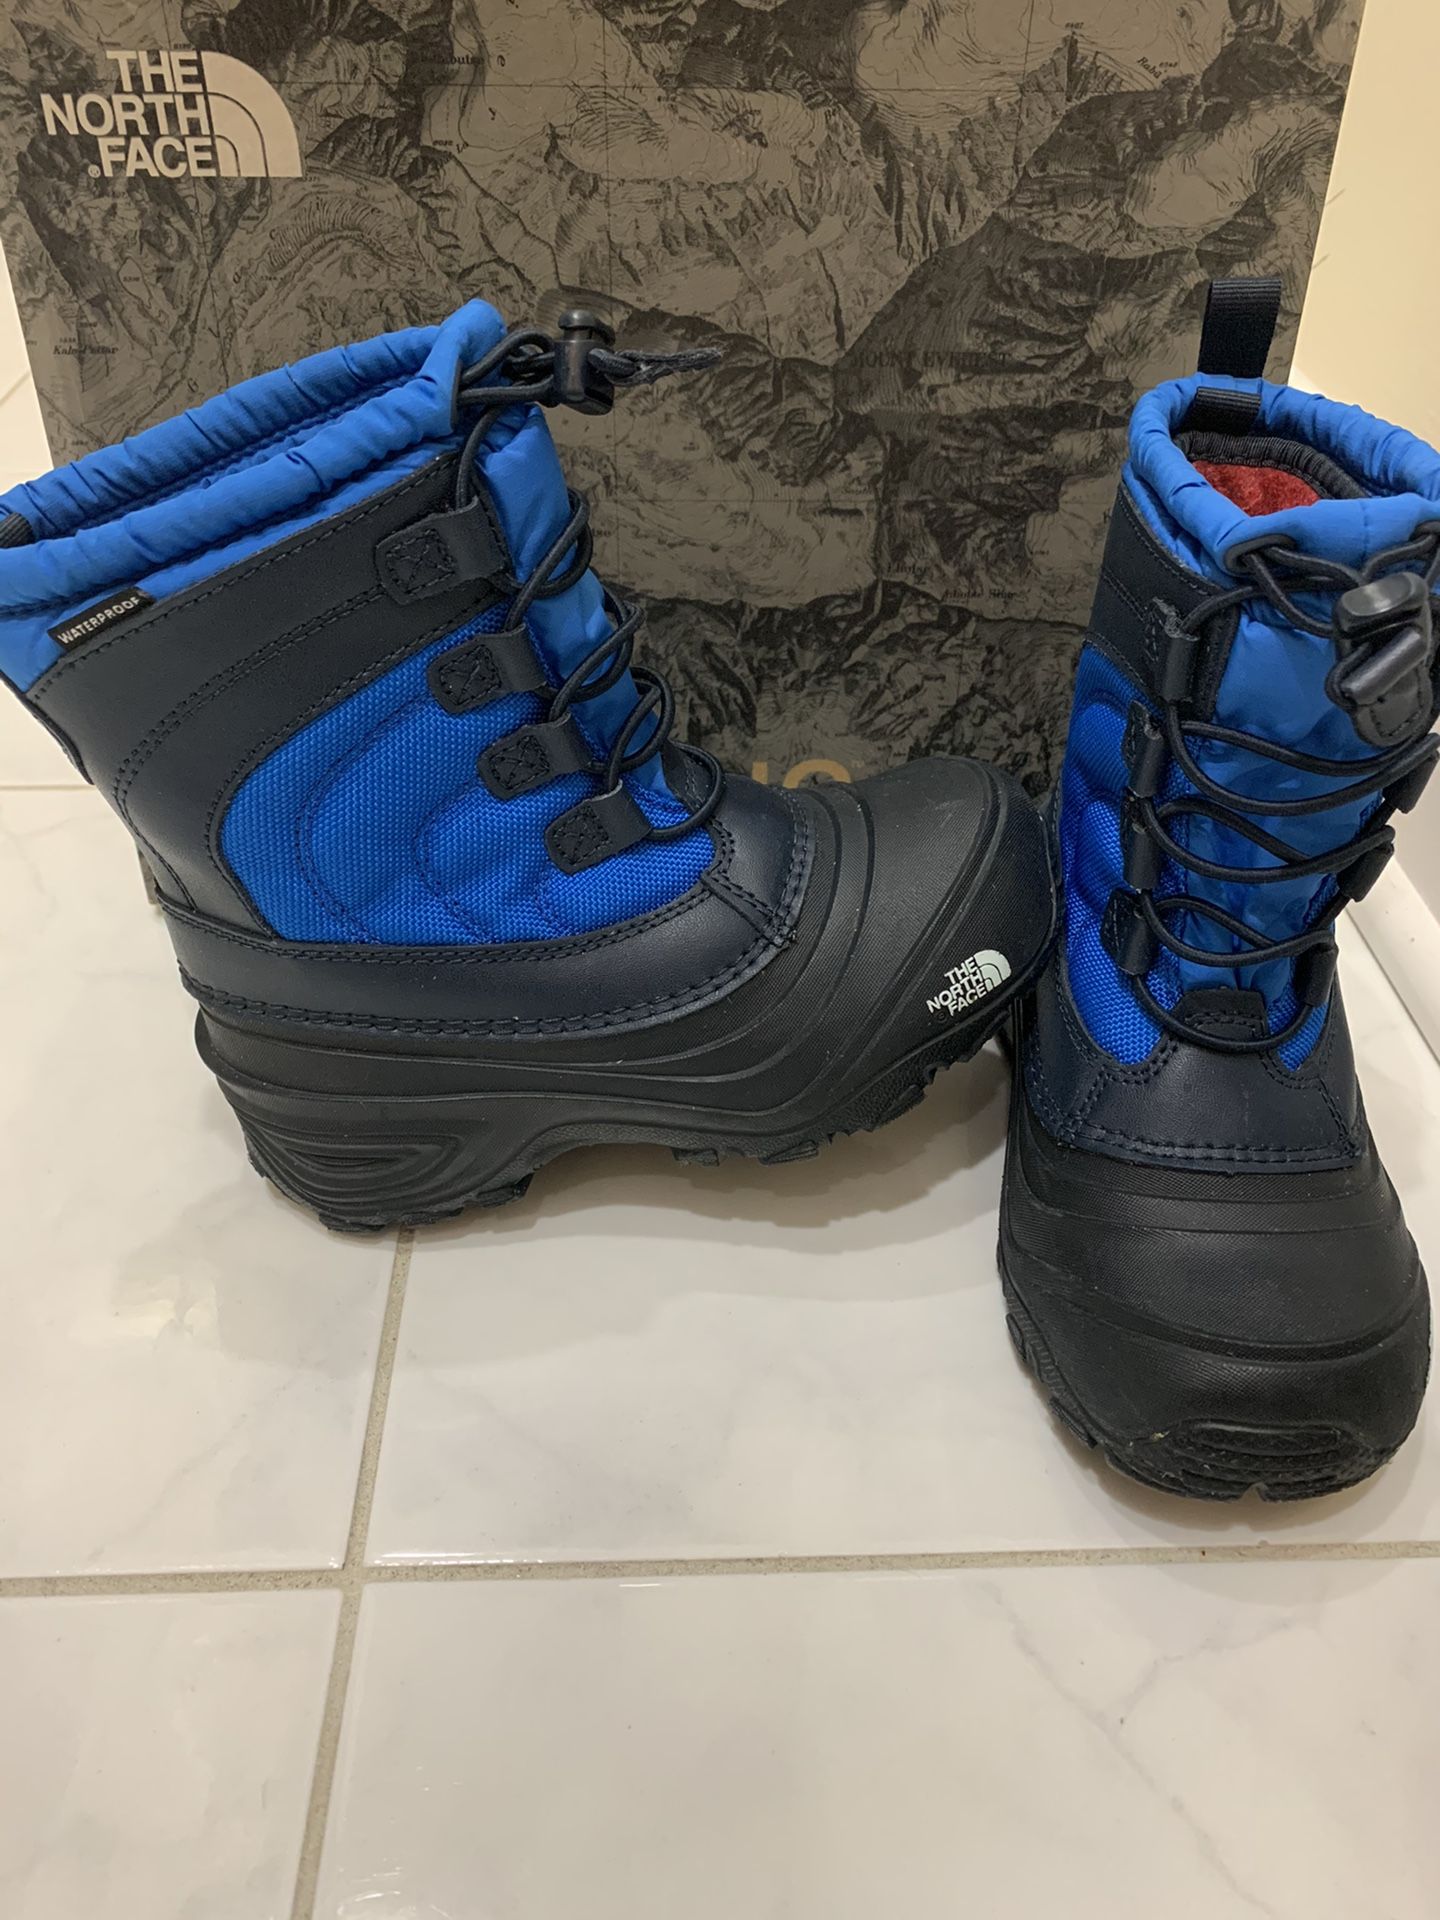 The North Face snow boots kids size 13